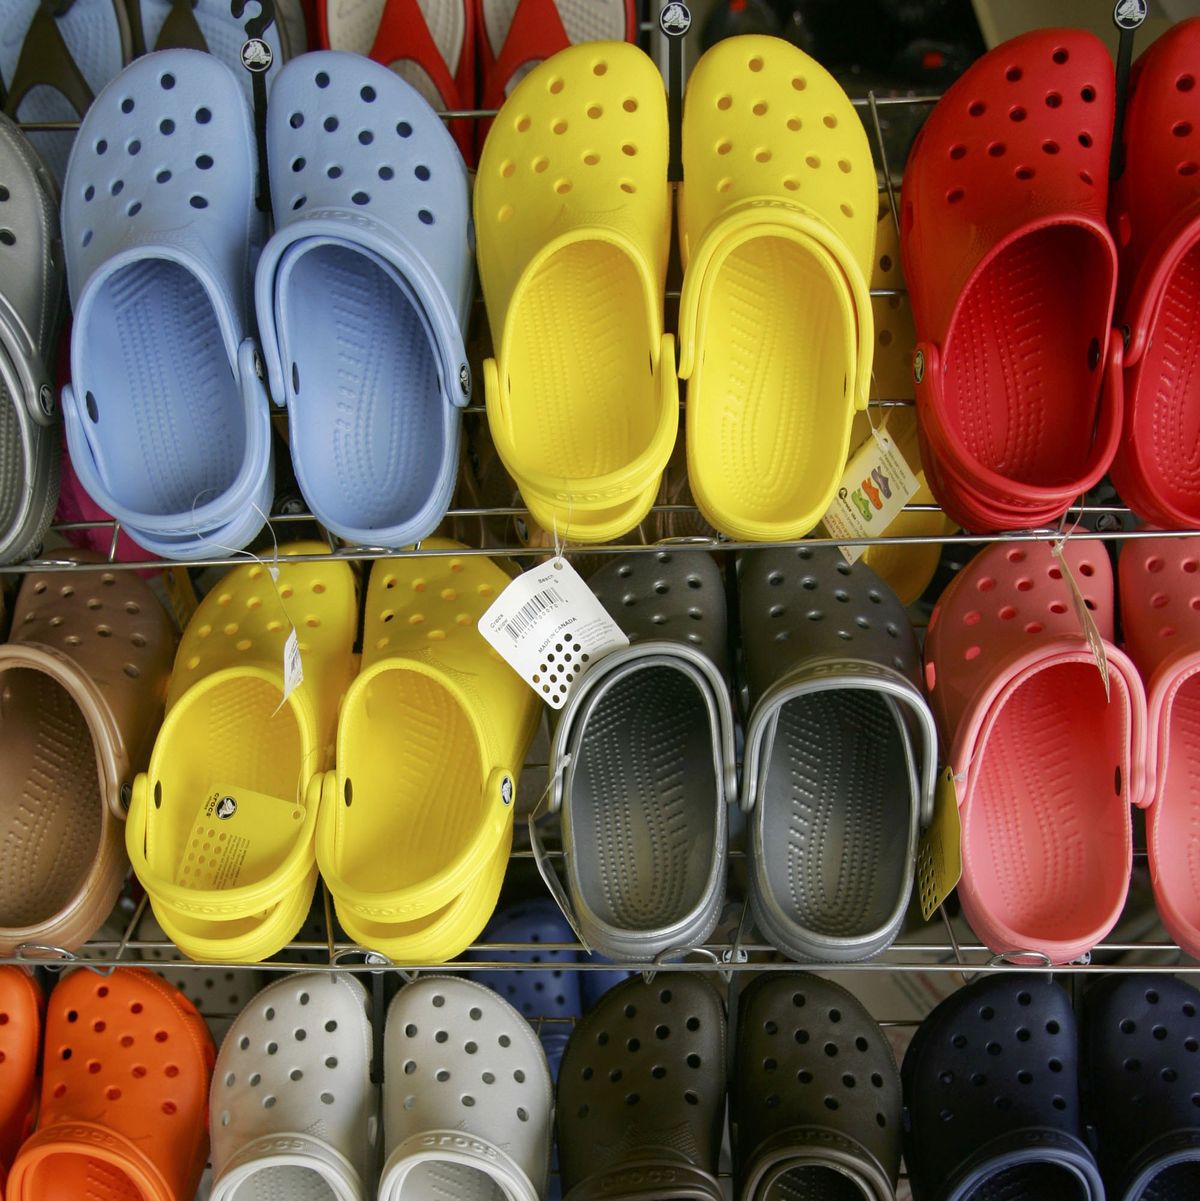 Hotellet justere Borgerskab Crocs Are Officially 20 Years Old. Here's Why Now's the Time to Buy a Pair